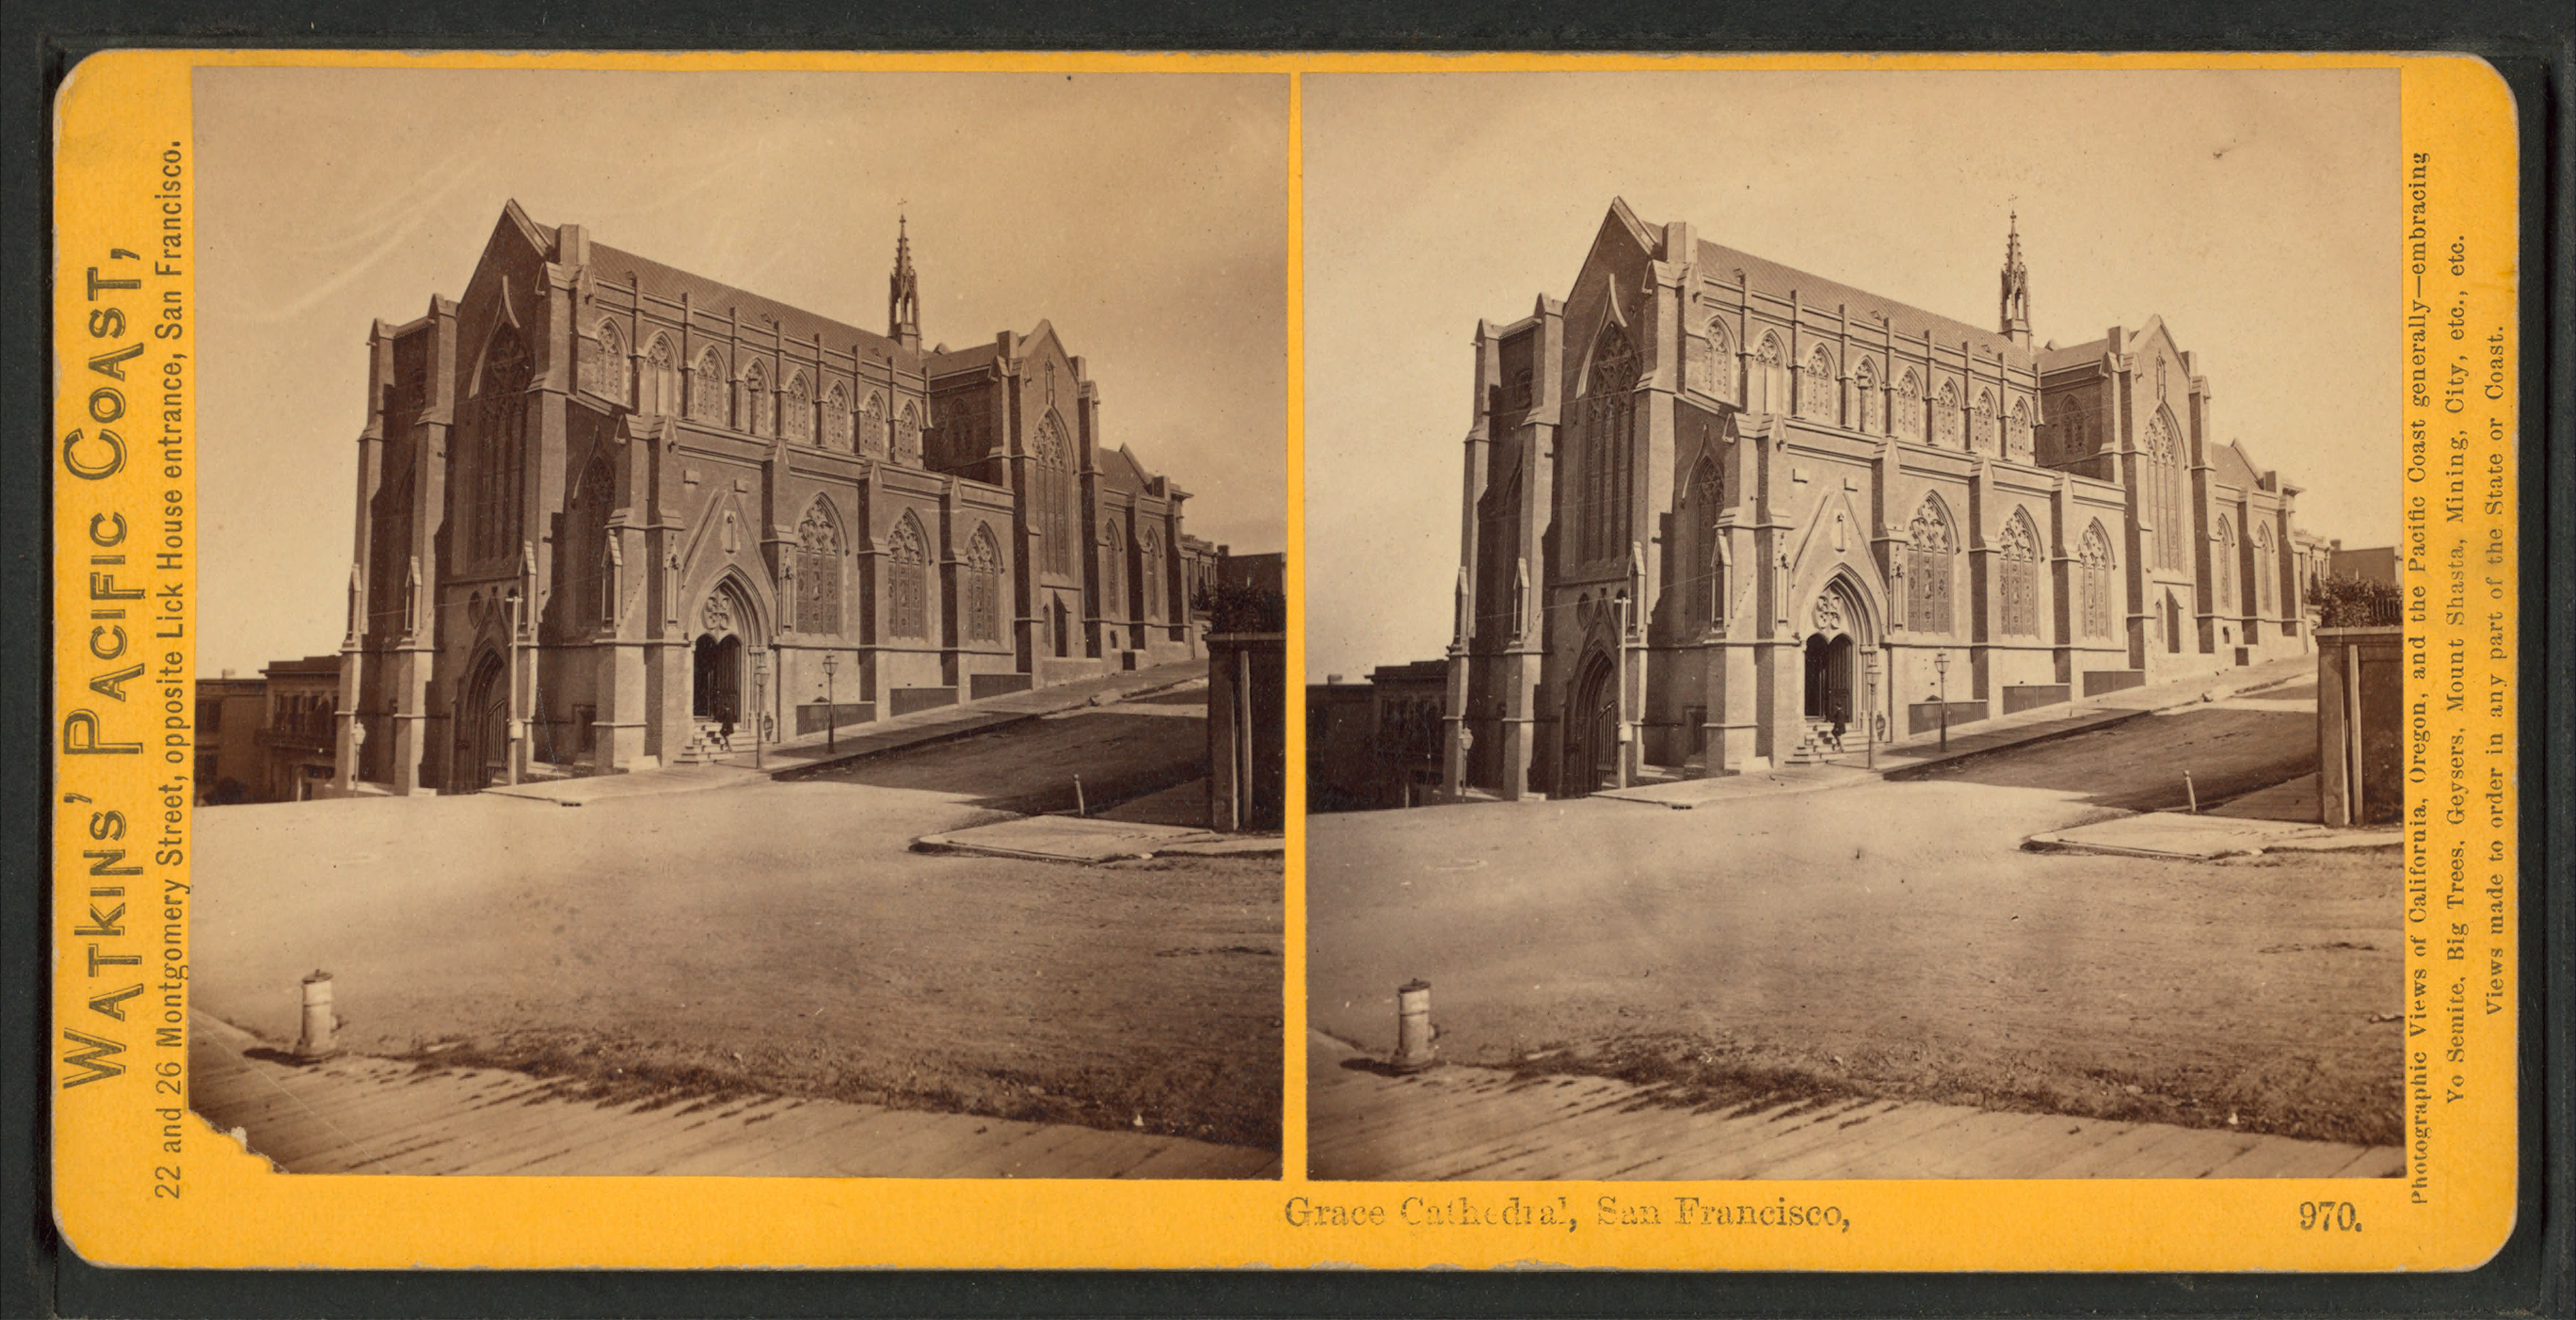 Grace_Cathedral,San_Francisco,_from_Robert_N._Dennis_collection_of_stereoscopic_views